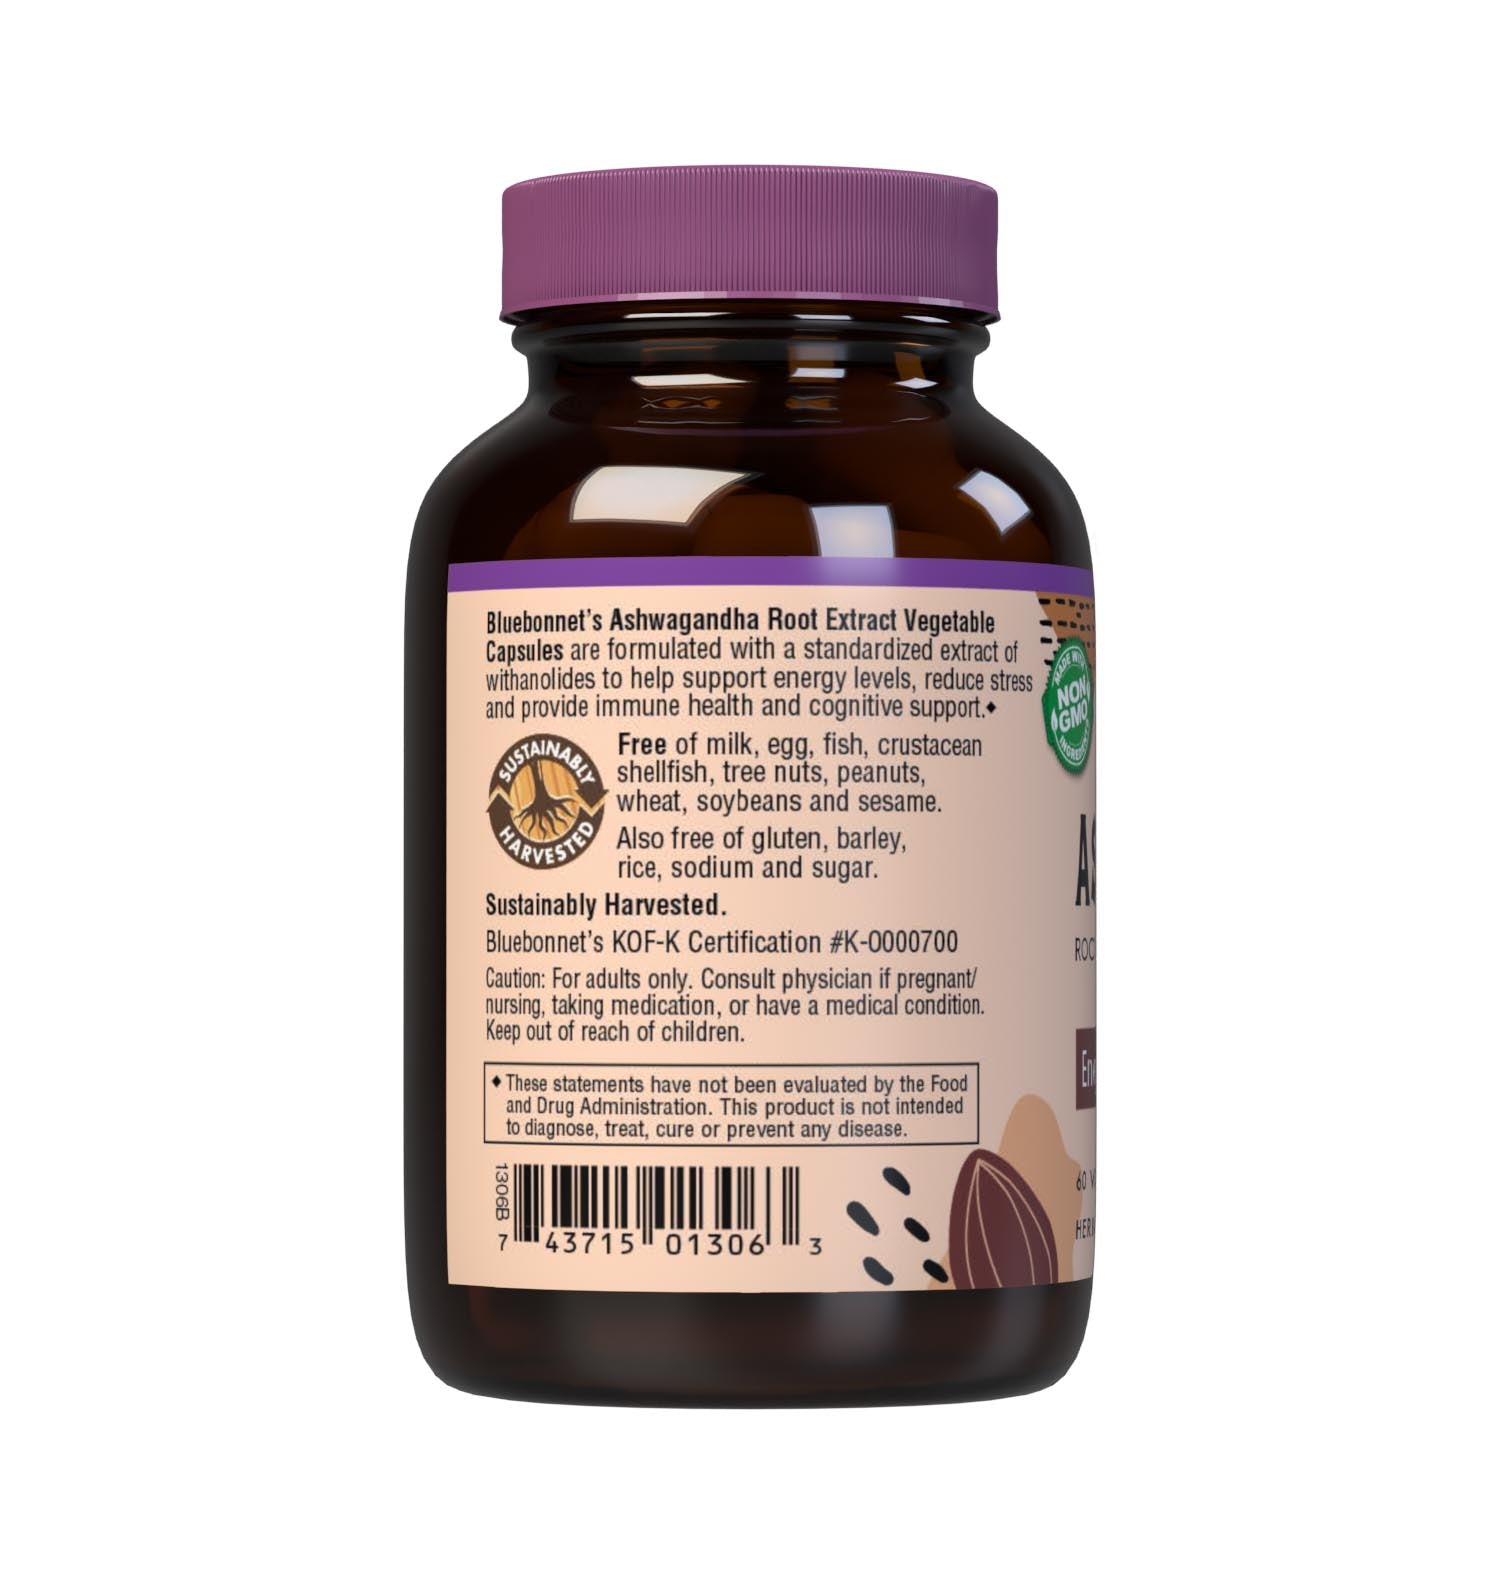 Bluebonnet’s Ashwagandha Root Extract 60 Vegetable Capsules are specially formulated with a standardized extract of withanolides from sustainably harvested, non-GMO ashwagandha root using a clean and gentle water-based extraction method. As the most researched active constituent in this Ayurvedic adaptogenic herb, withanolides are known to promote healthy energy levels while reducing stress and providing immune and cognitive support. Description panel. #size_60 count